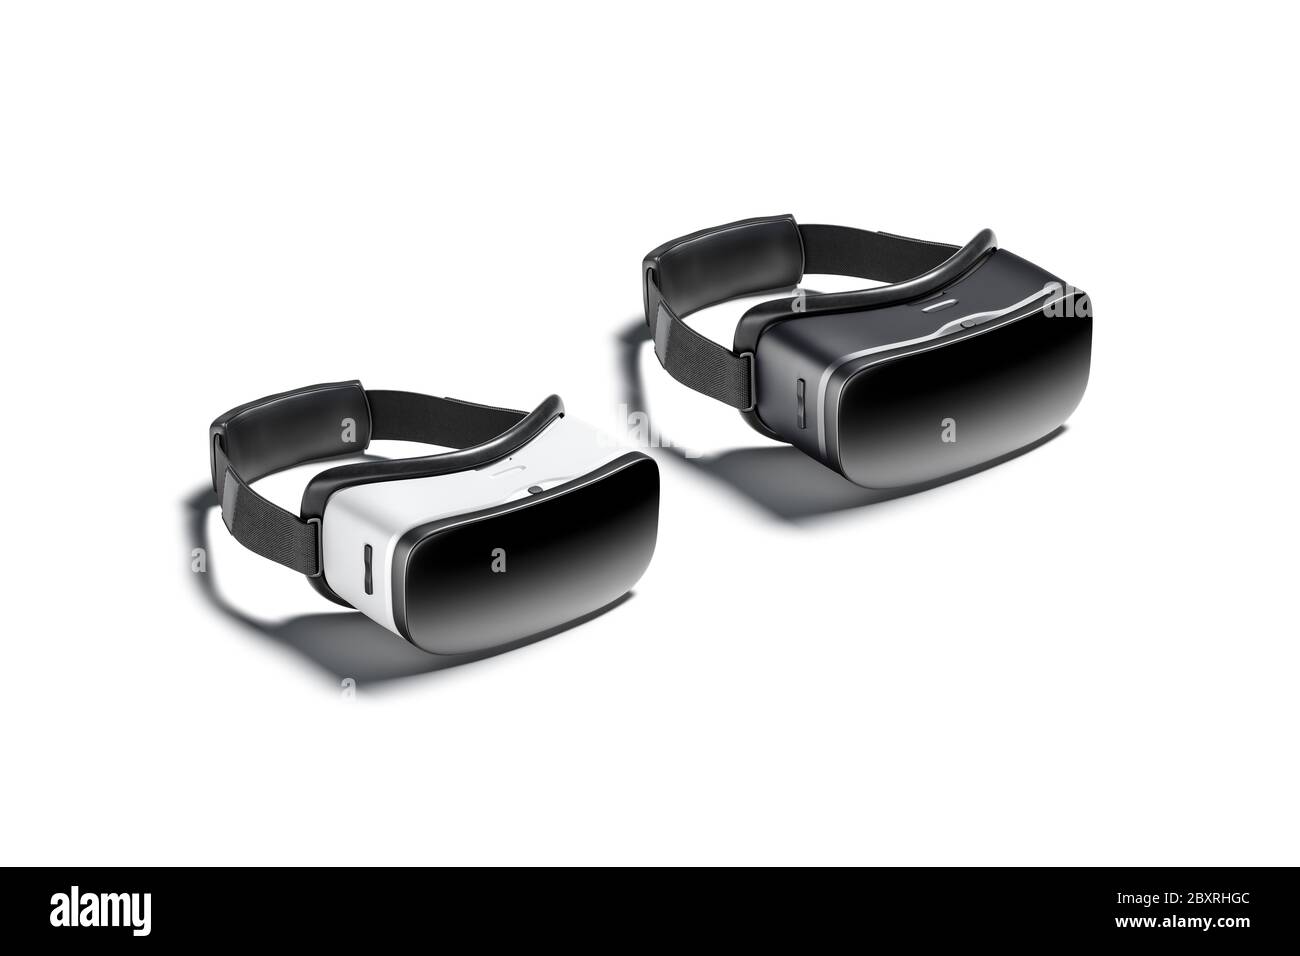 Blank black and white virtual reality goggles mockup, side view Stock Photo